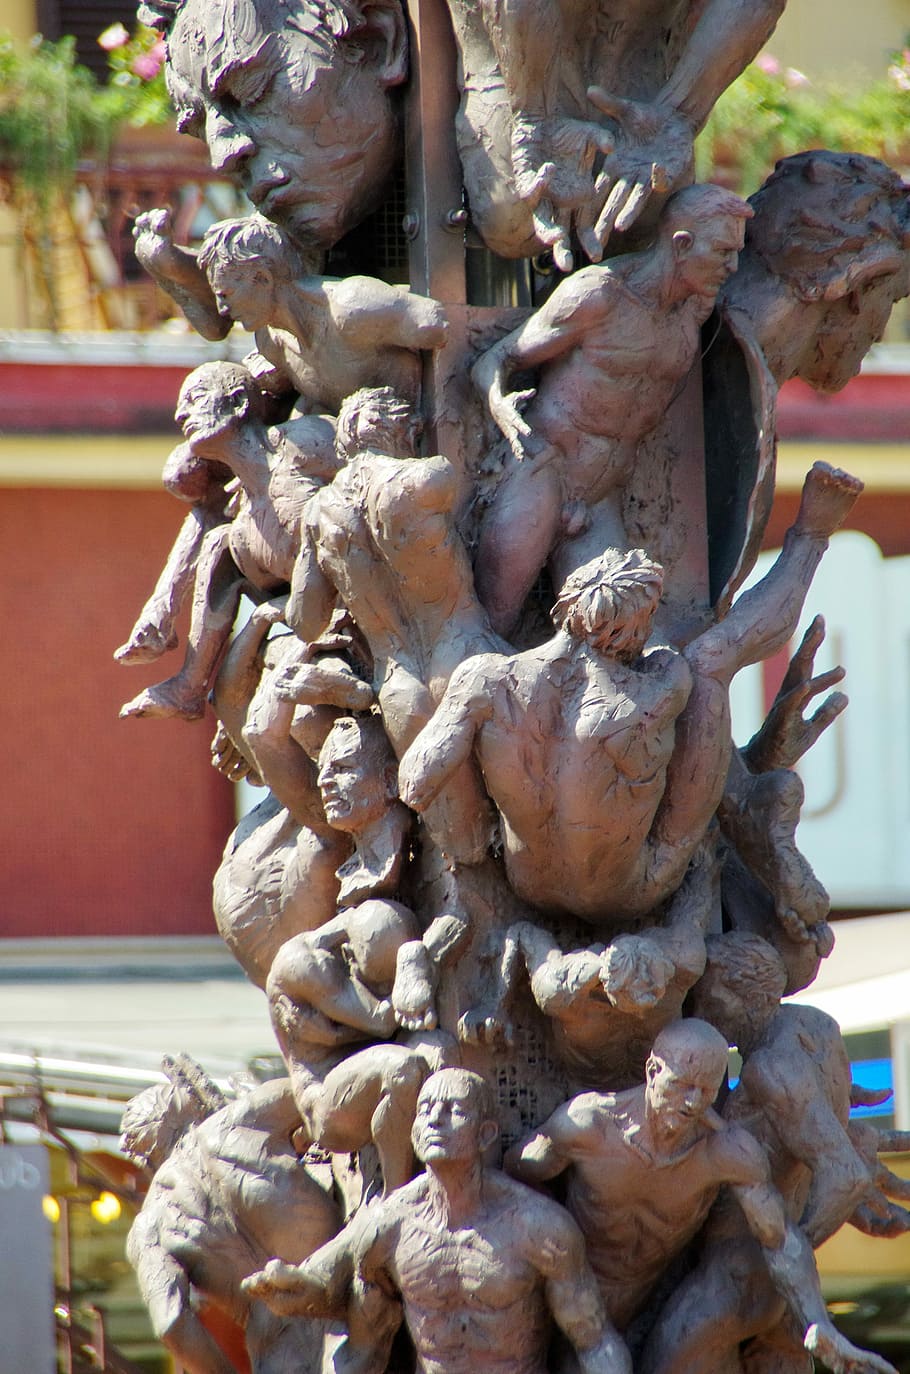 Italy, Sorrento, Statue, Pile, Damnation, large group of animals, seafood, market, outdoors, close-up